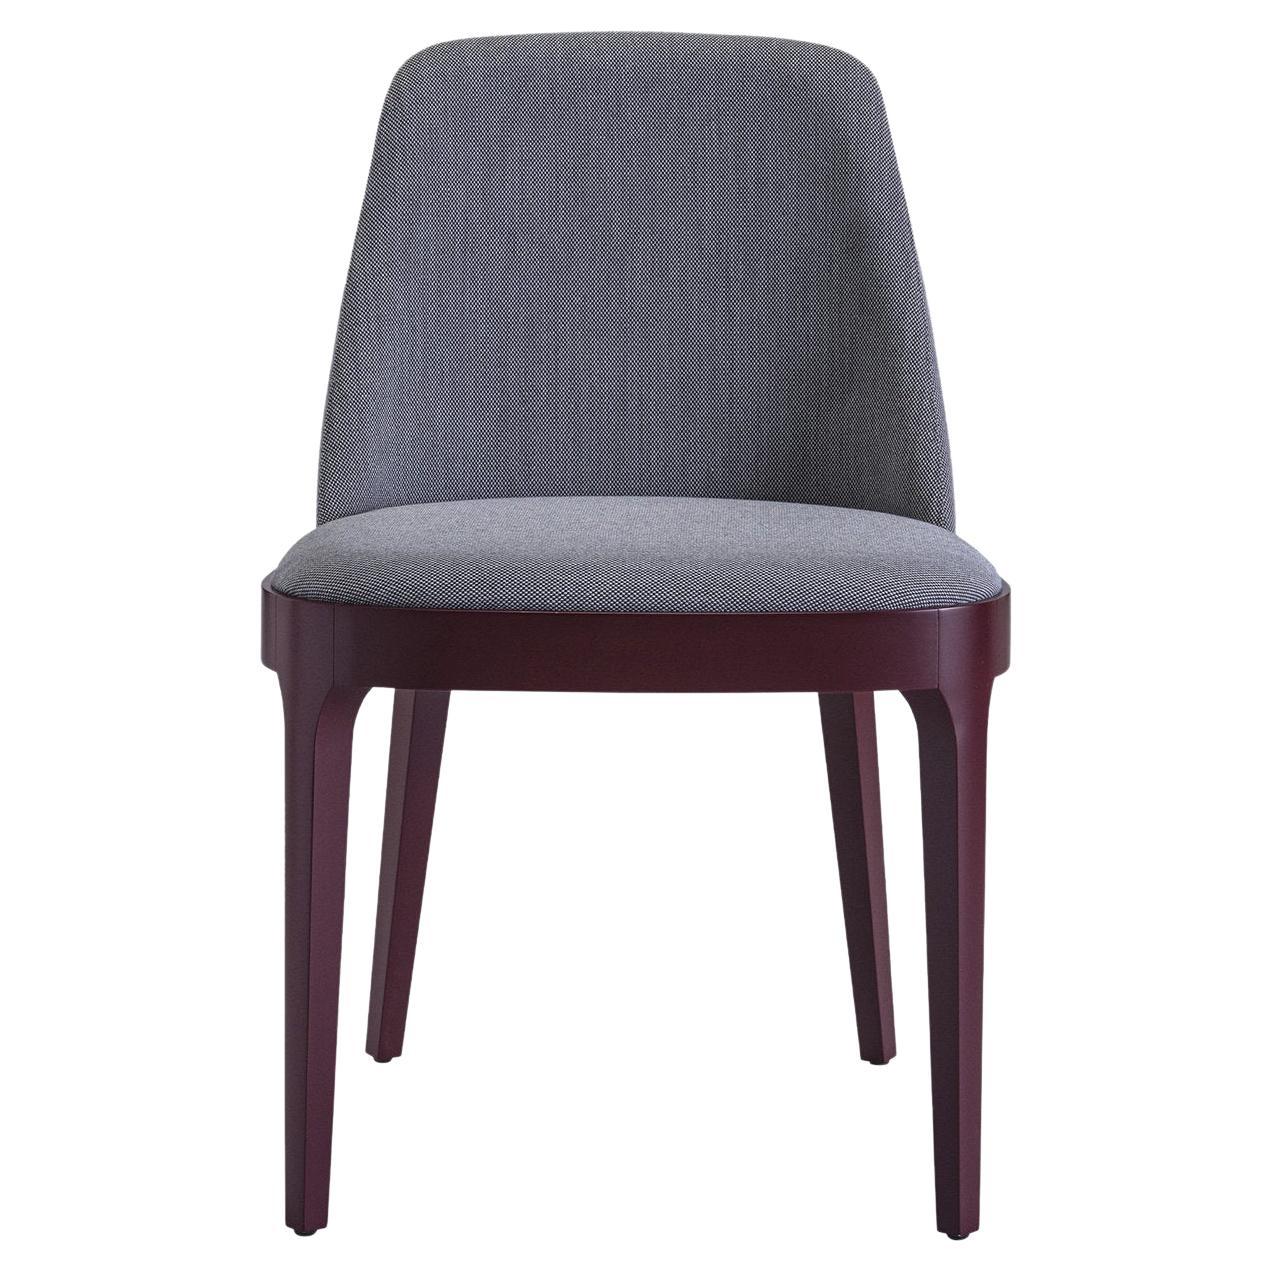 Club 24 Gray Chair For Sale